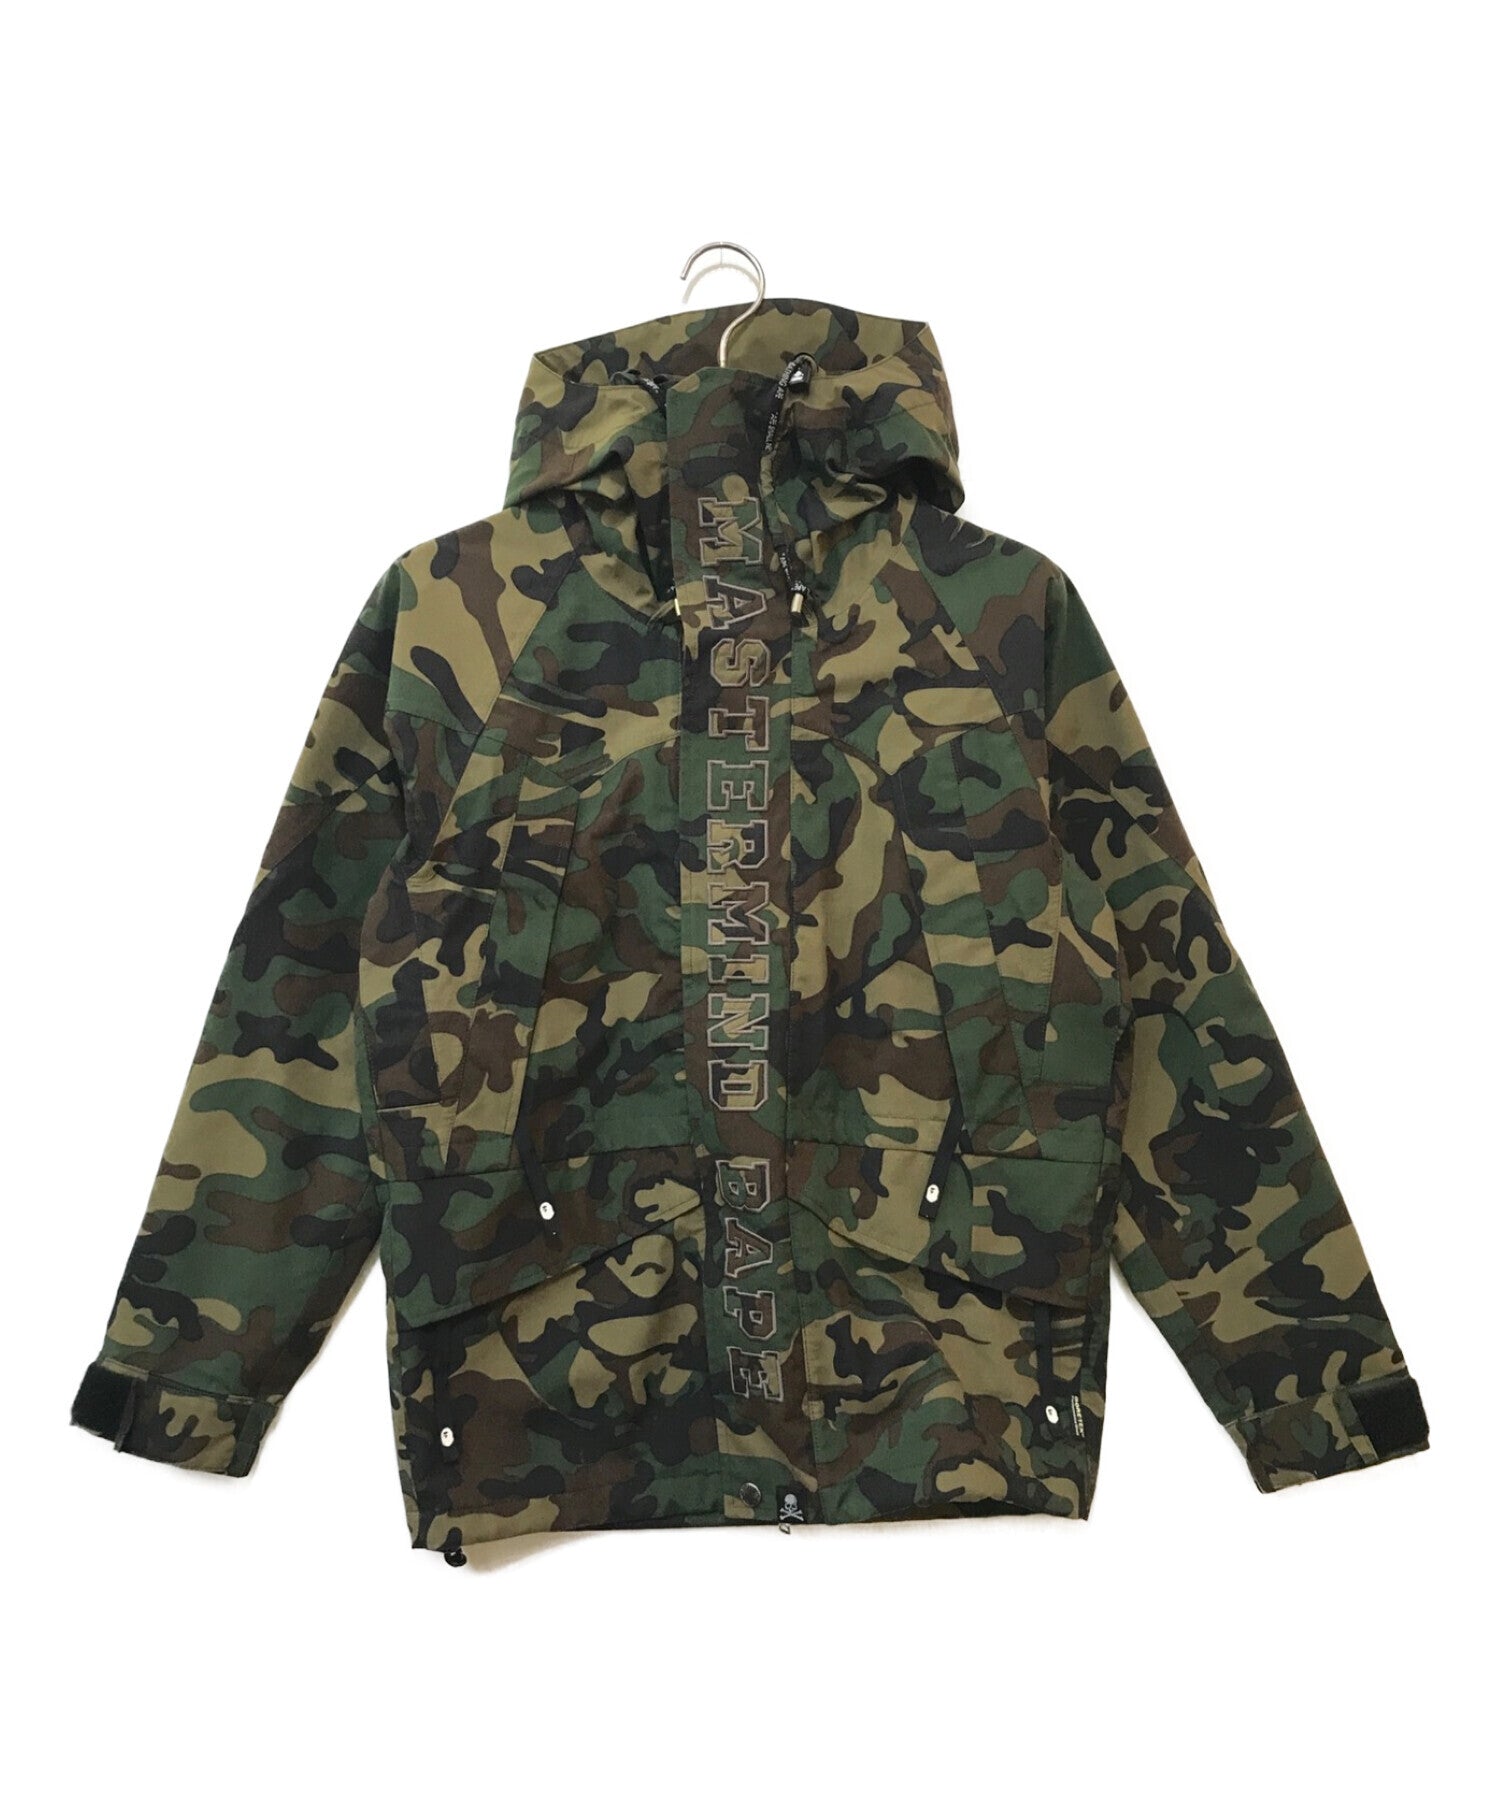 Pre-owned] A BATHING APE GORE-TEX Snowboard Jacket/Mountain Parka